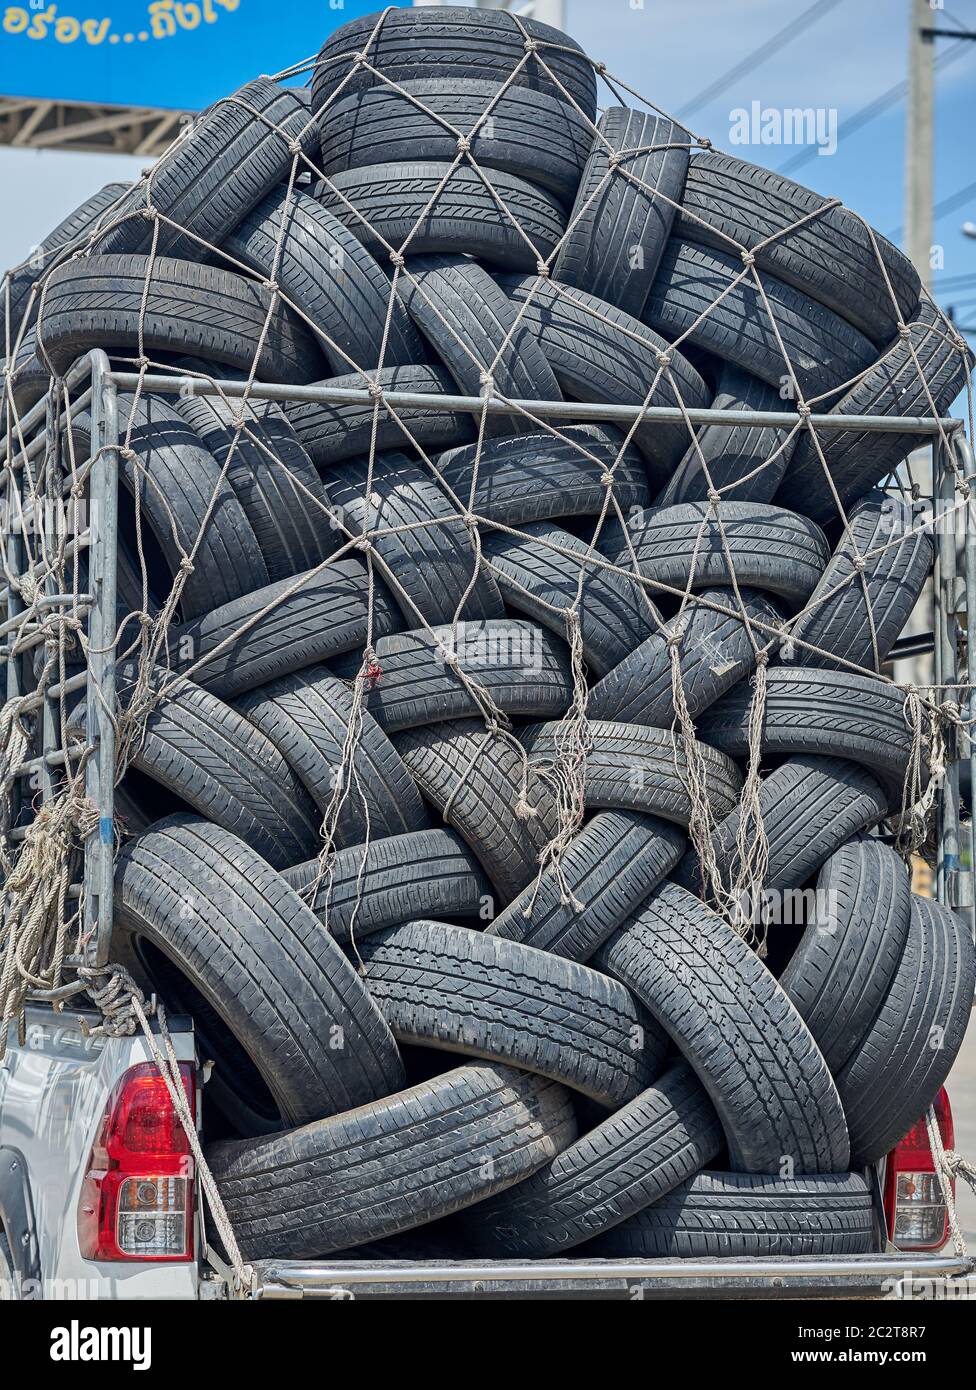 A truck full of used car tires. Stock Photo